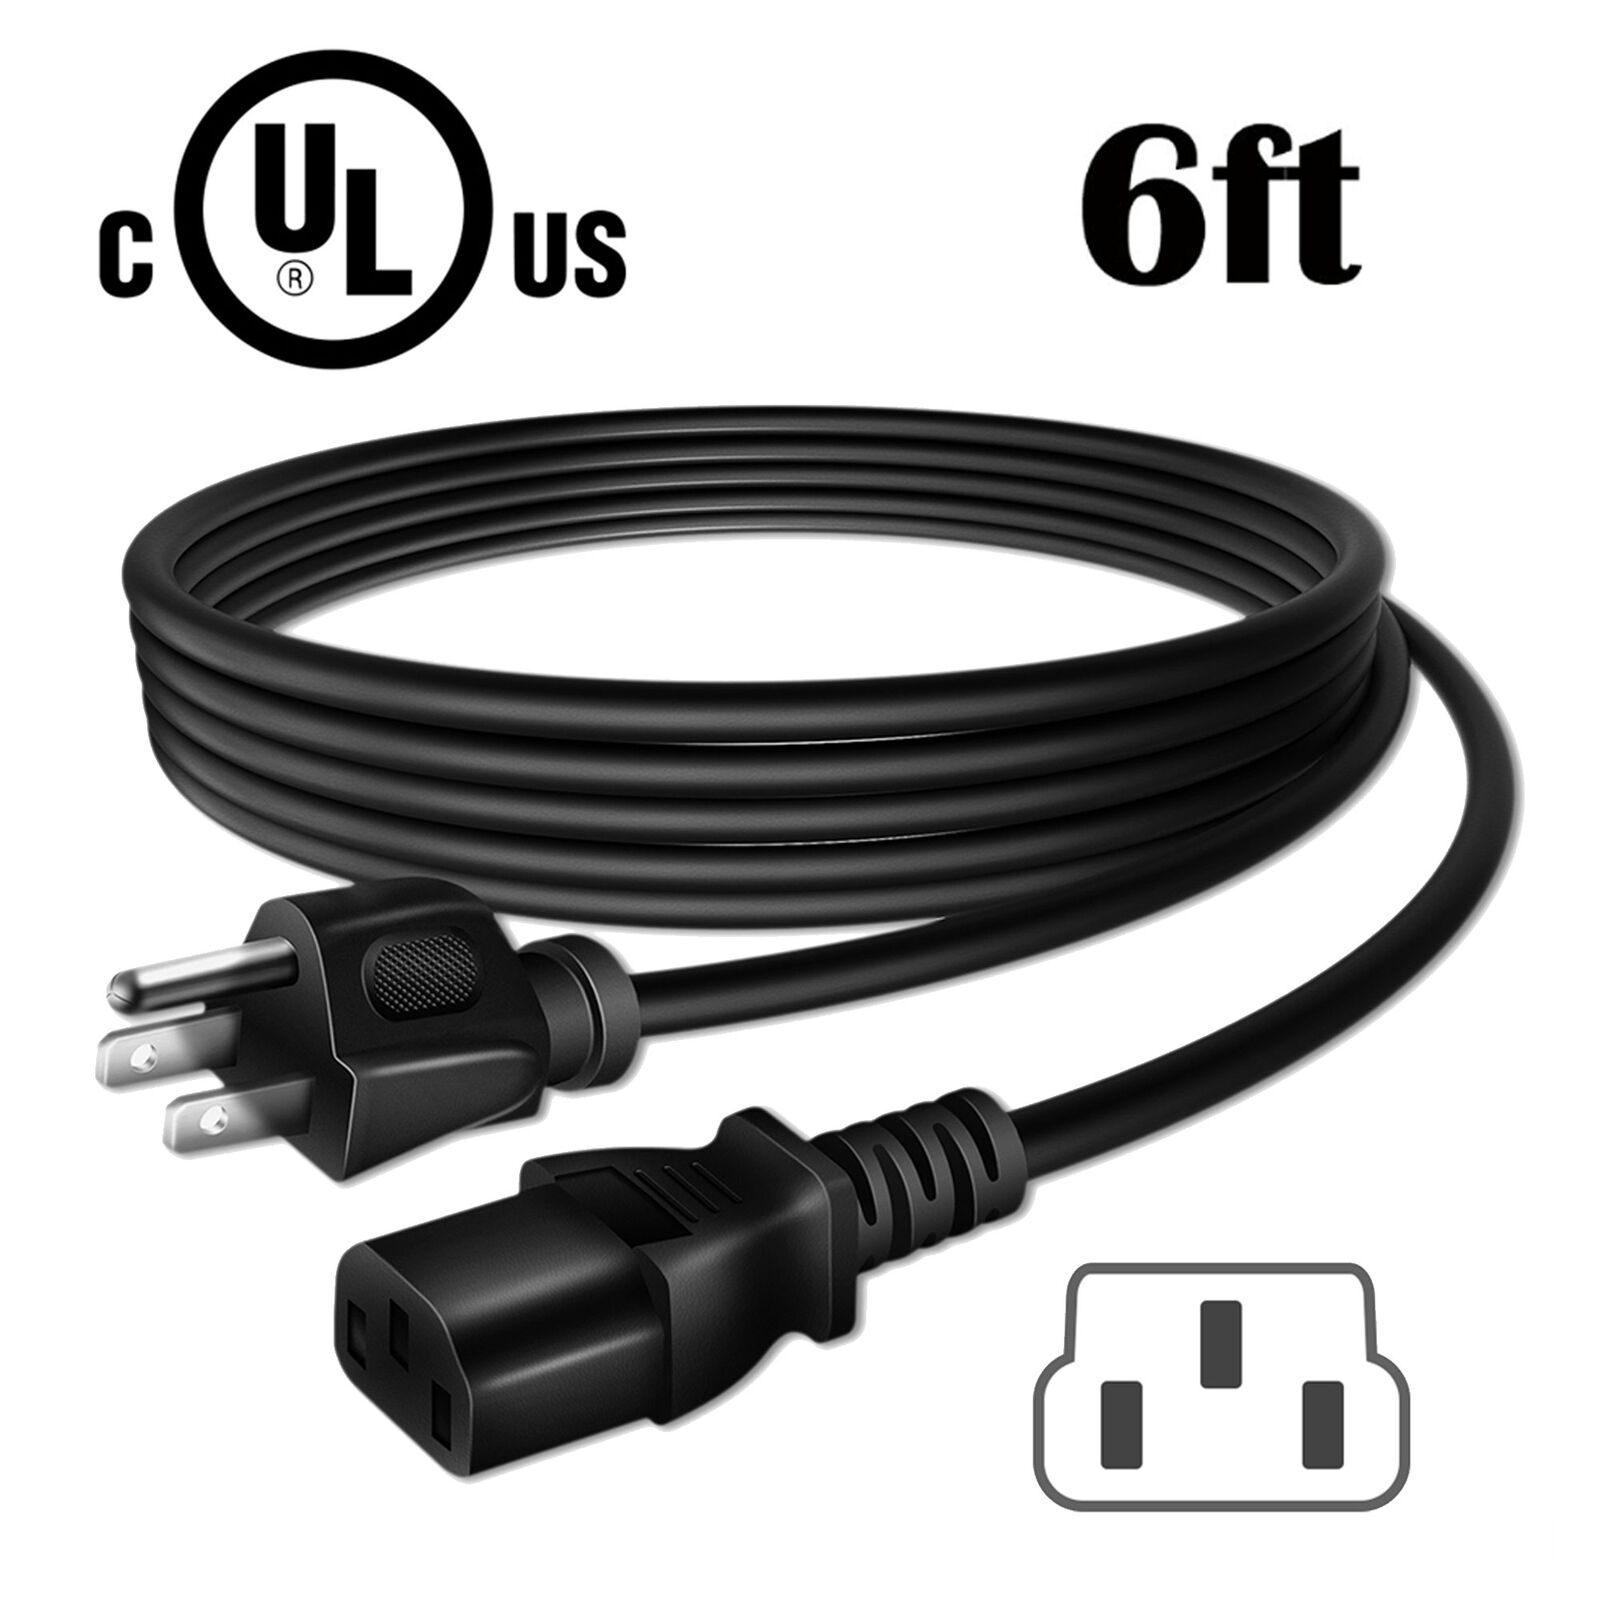 PwrON 6FT UL AC Power Cord Cable For Samsung 27